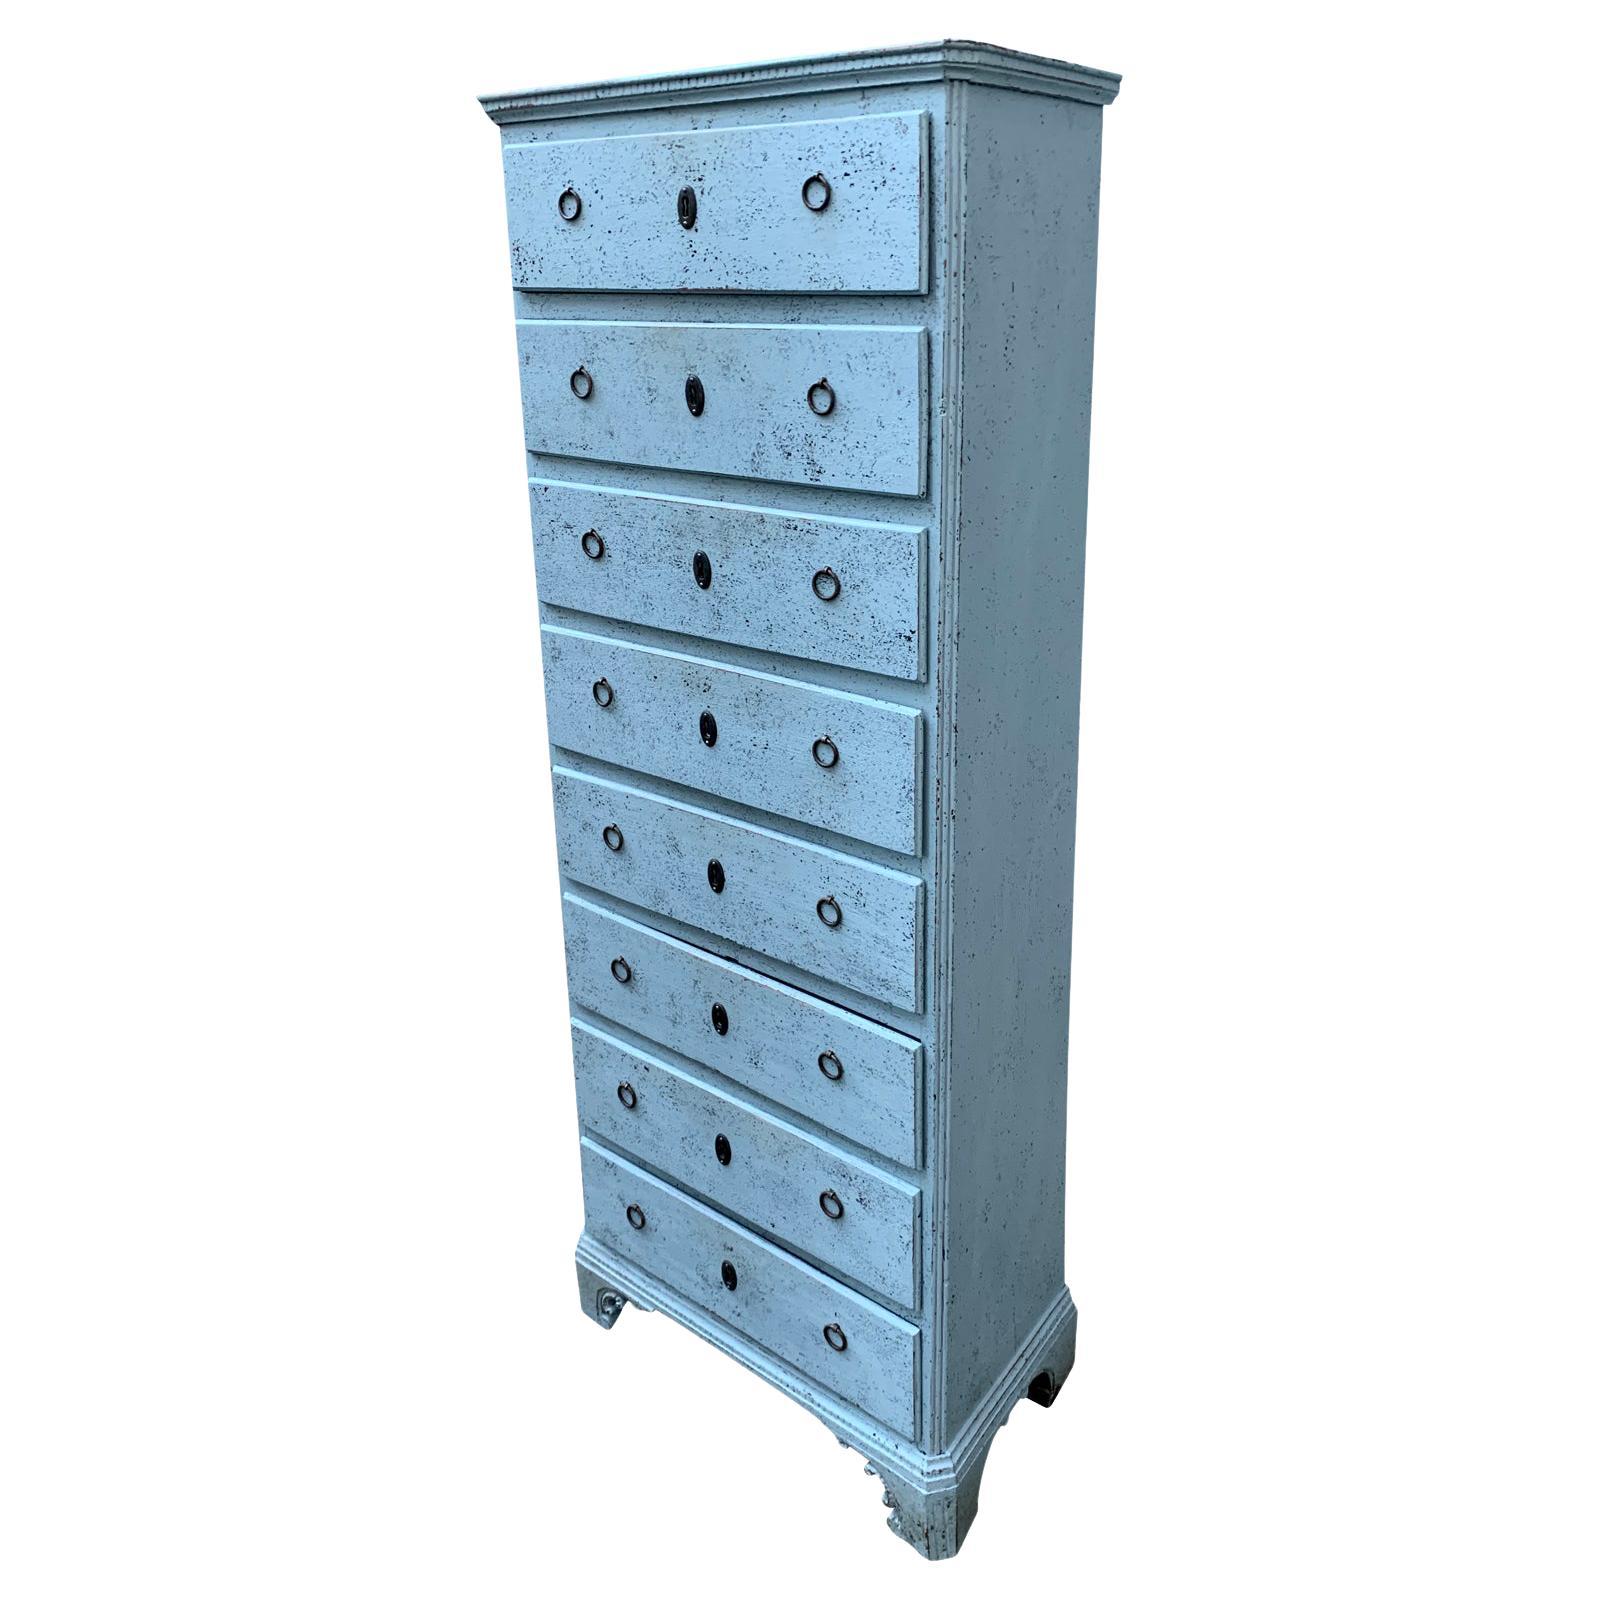 This 18th century antique chest of drawers or tallboy, painted in typical Gustavian light blue/grey color is from Danmark or Southern Sweden. 
This dresser comes with original working hardware, locks and key. All the drawers open with ease using